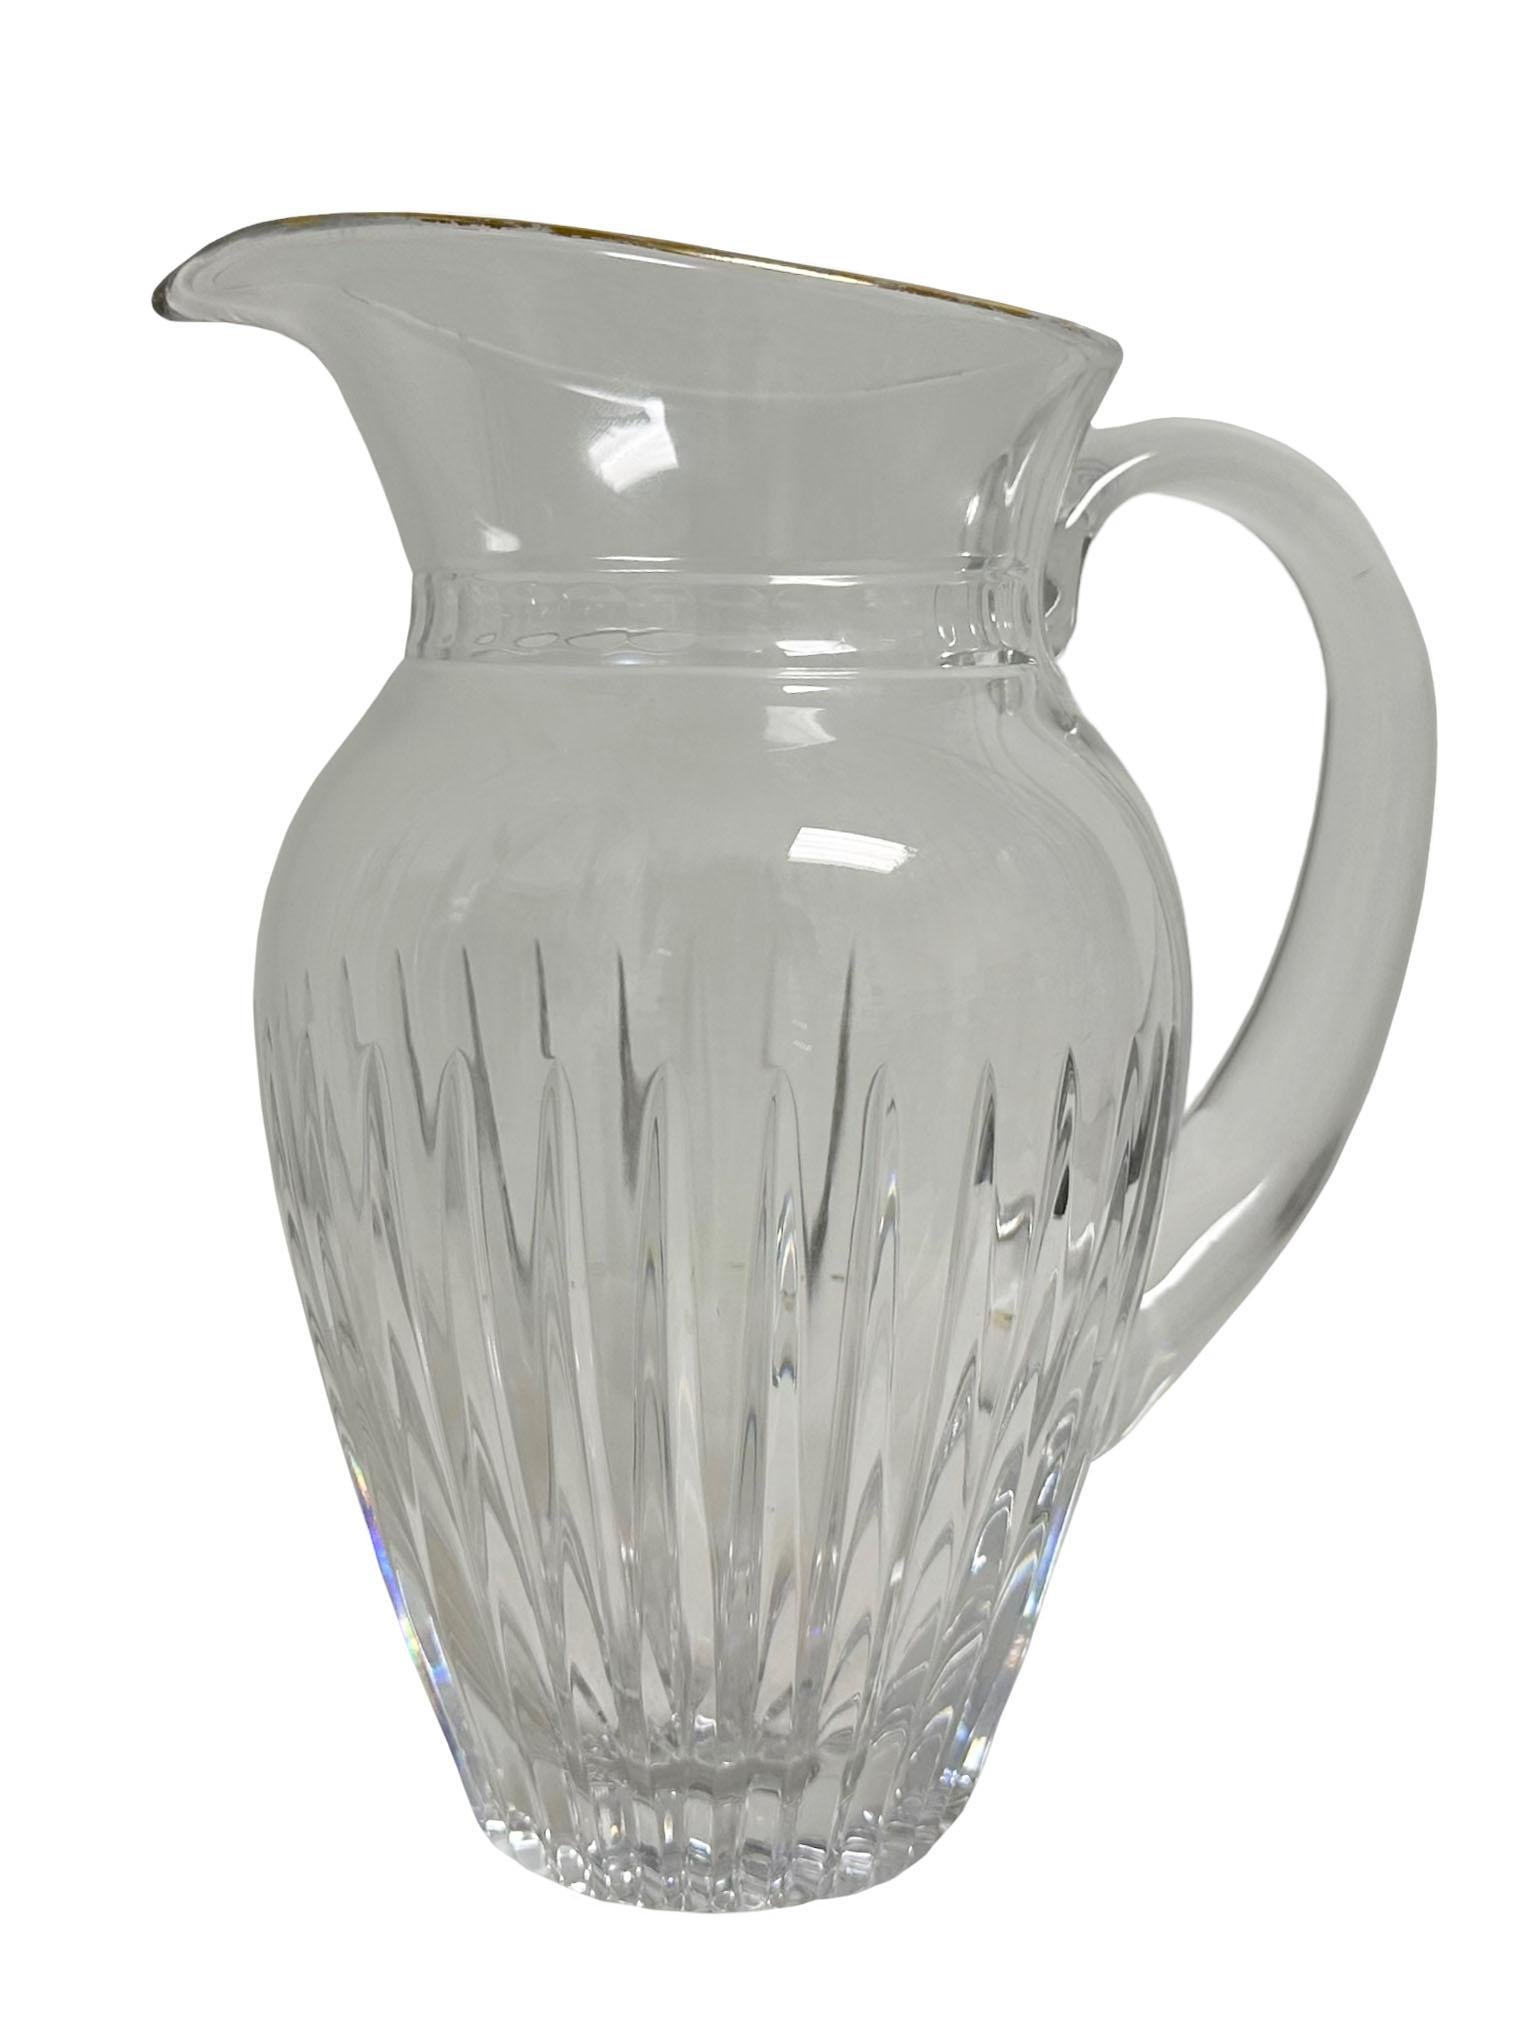 A beautiful vintage Waterford pitcher signed by Waterford and the artist. Has a gold rim around the top which is unusual. England, circa 1950s.